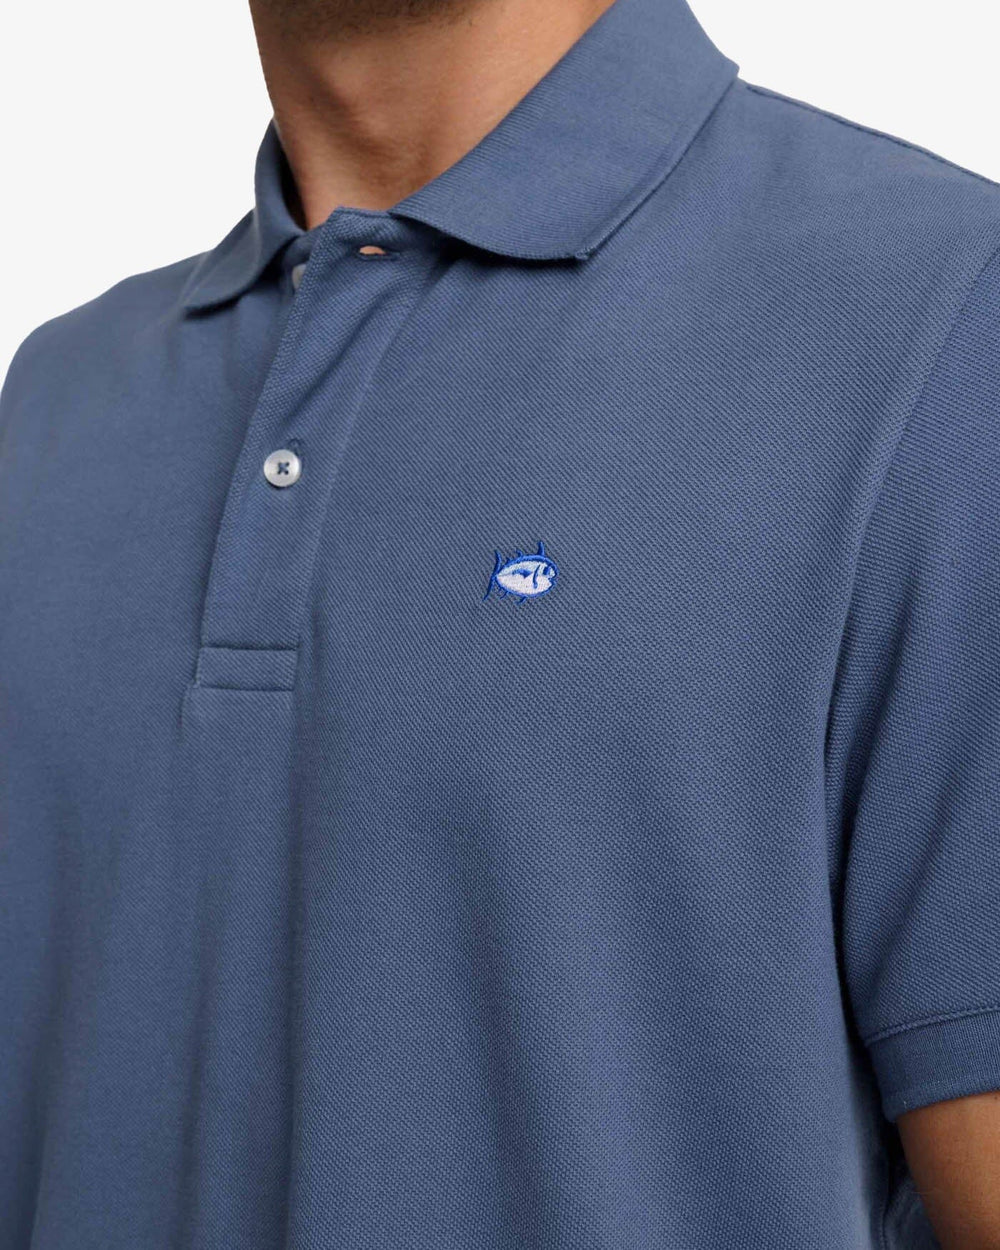 The detail view of the Southern Tide New Skipjack Polo Shirt by Southern Tide - Blue Haze